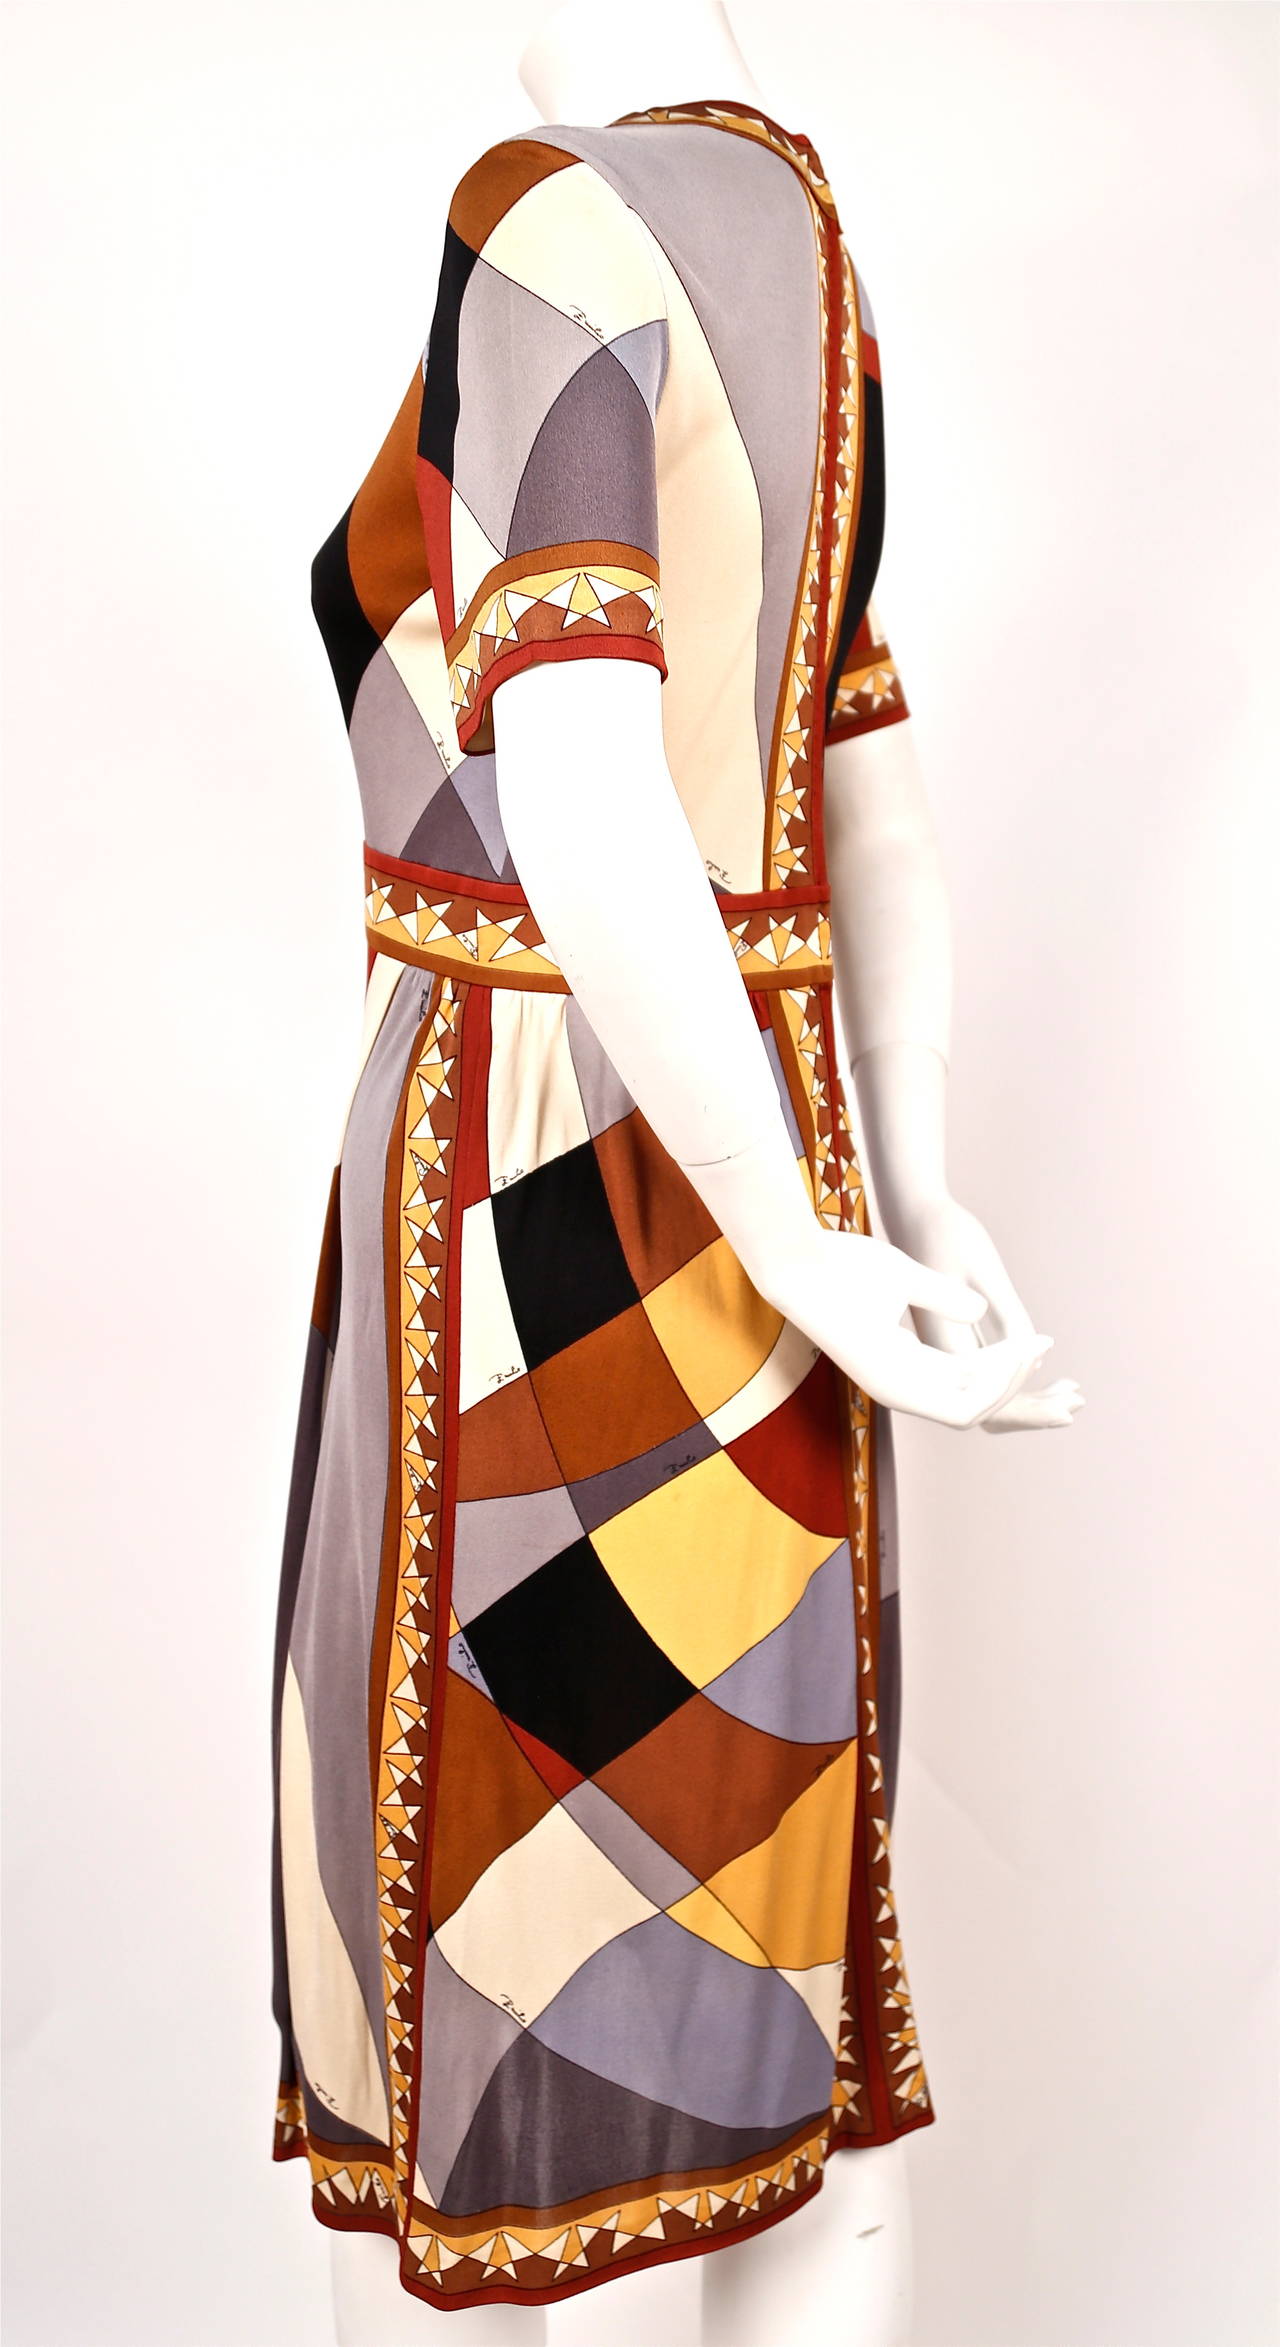 Vivid geometric printed silk jersey dress from Emilio Pucci dating to the 1960's. Fits a size 4-6. Approximate measurements: 16